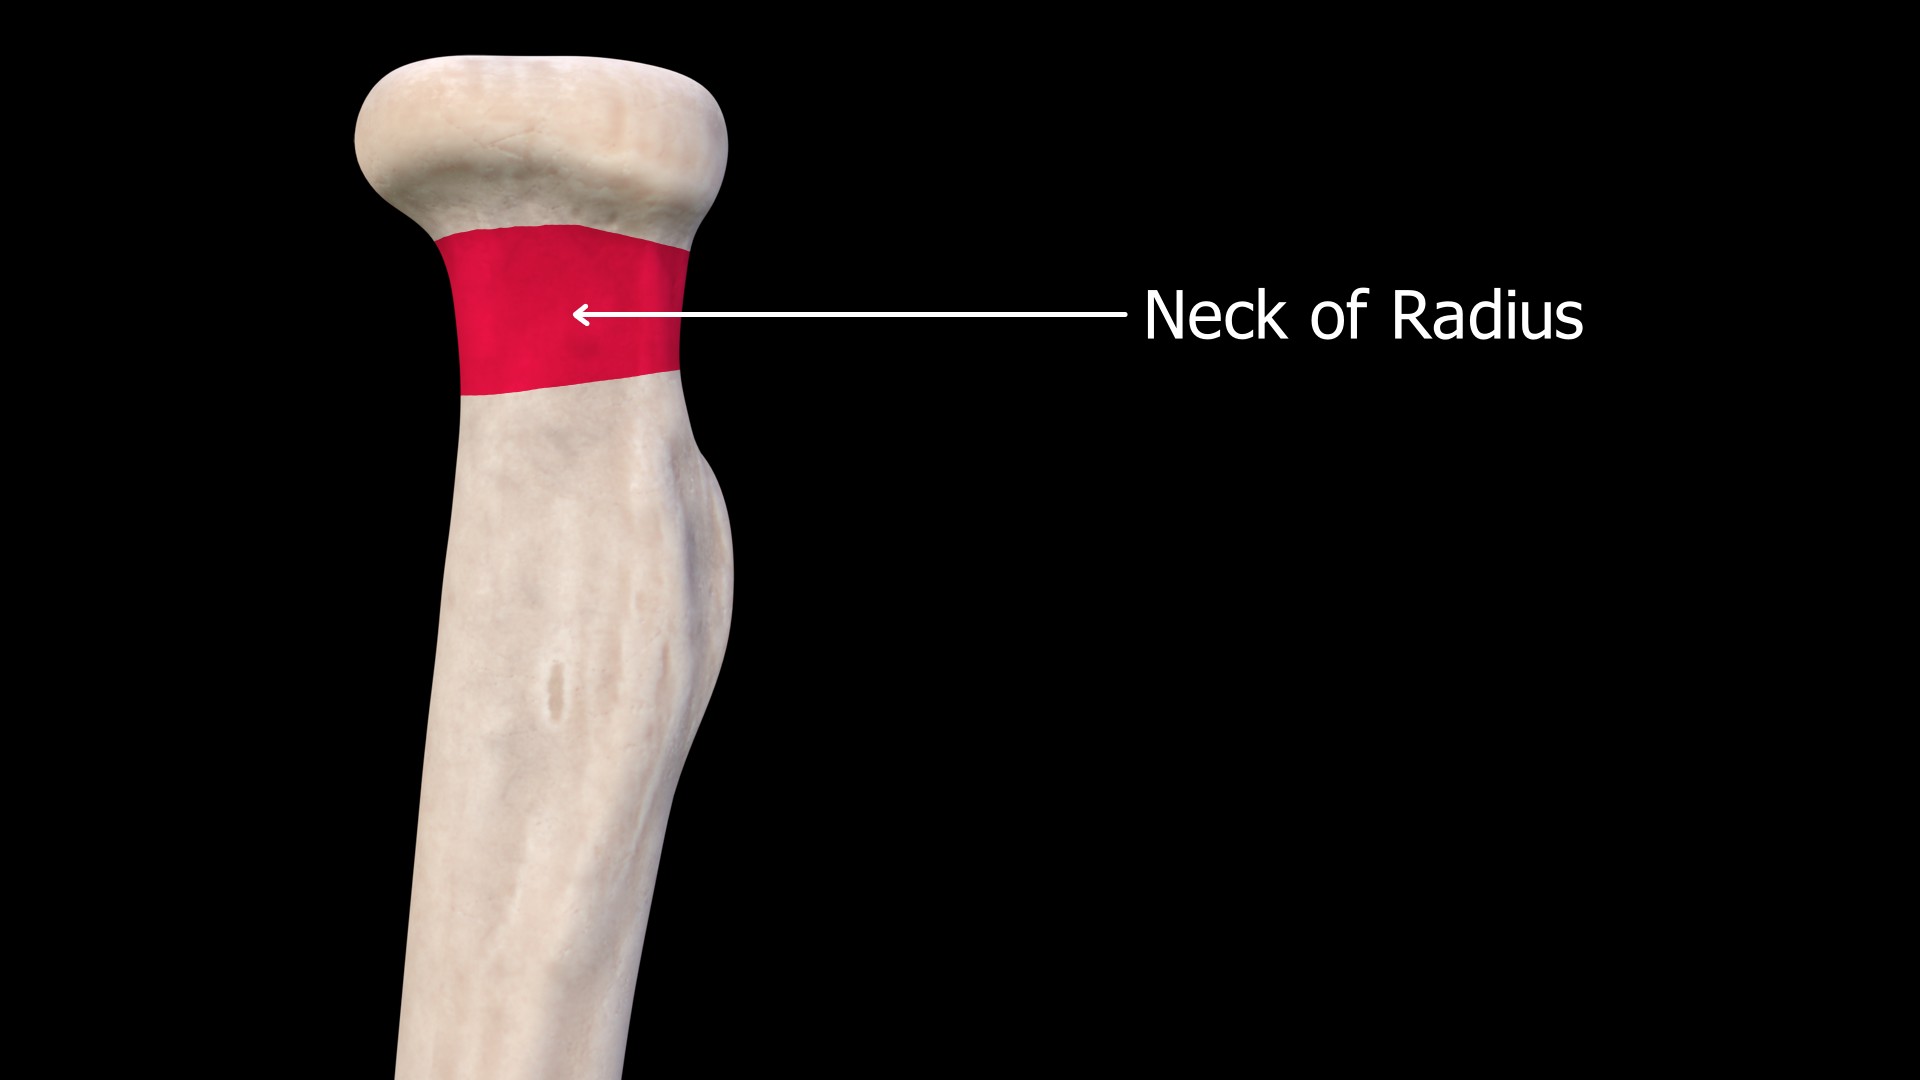 Neck of the radius is between the radial head and radial tuberosity